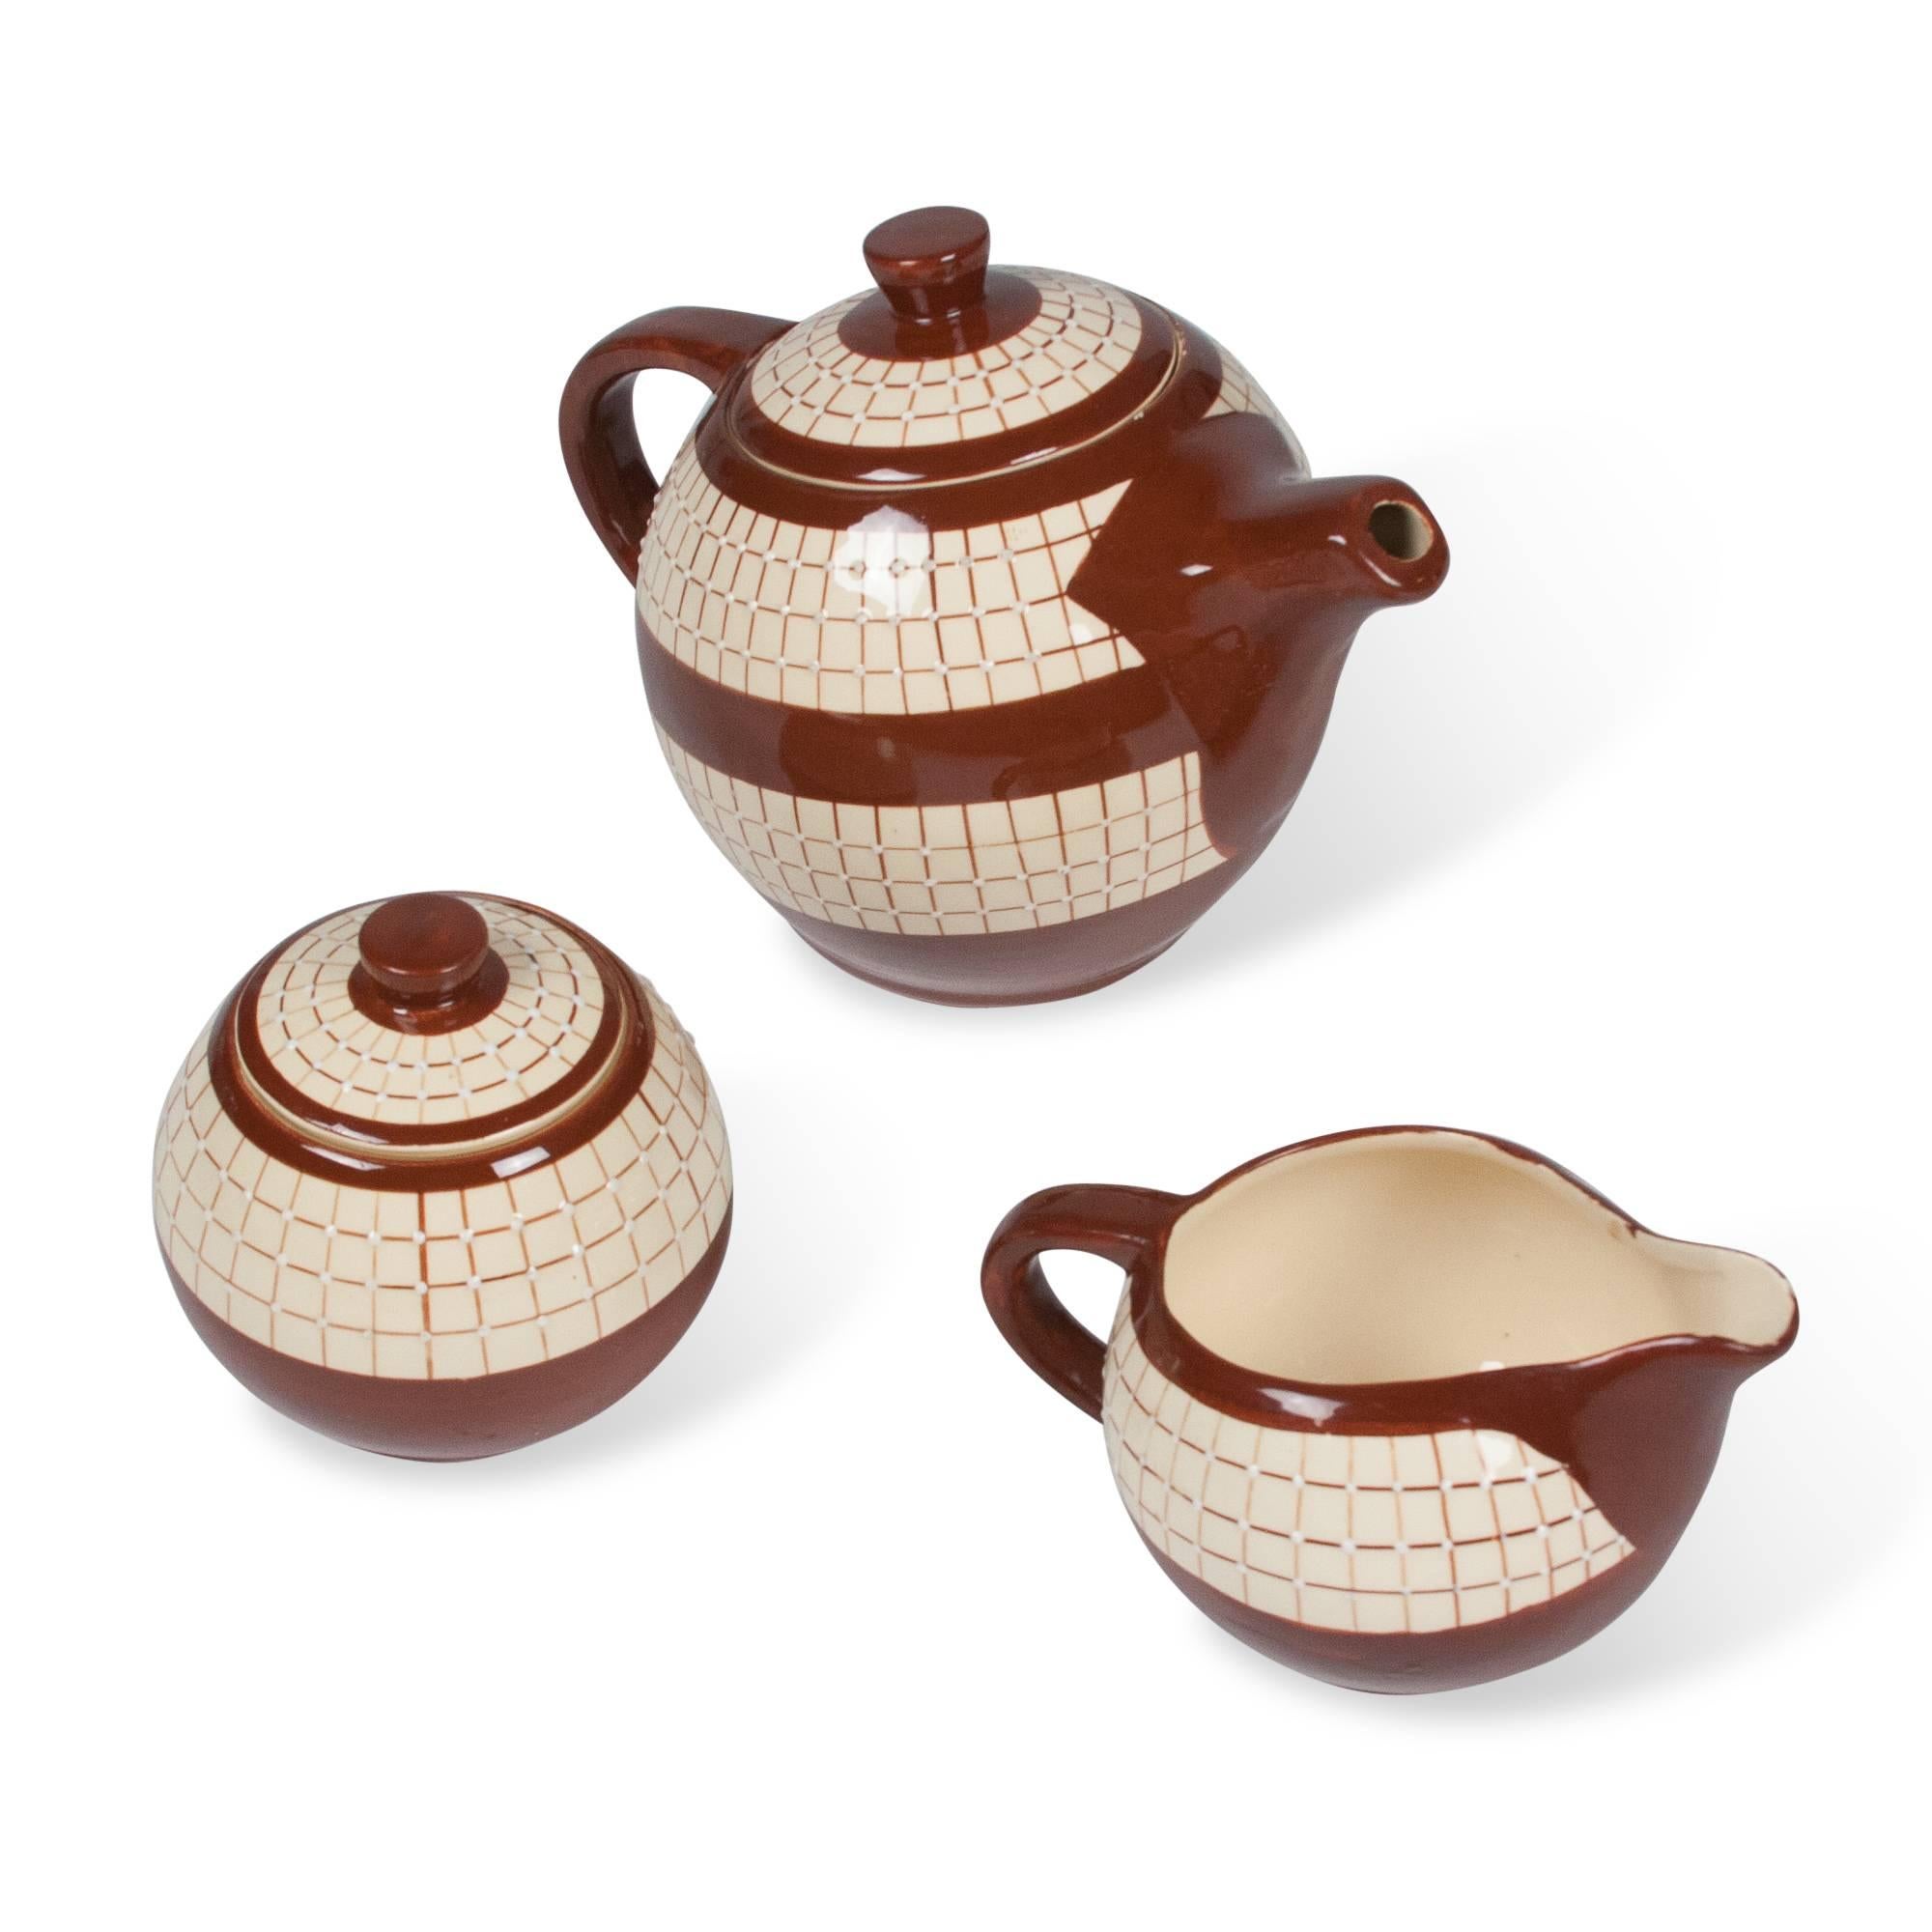 Three-piece ceramic tea service, comprising a tea pot, sugar bowl and creamer, in off-white glaze with red glazed bands, accents, and handles, by Longchamps, France 1950s. Signed to underside. 
Dimensions: 
Teapot: 6 in. height, 5 1/4 in. width, 8